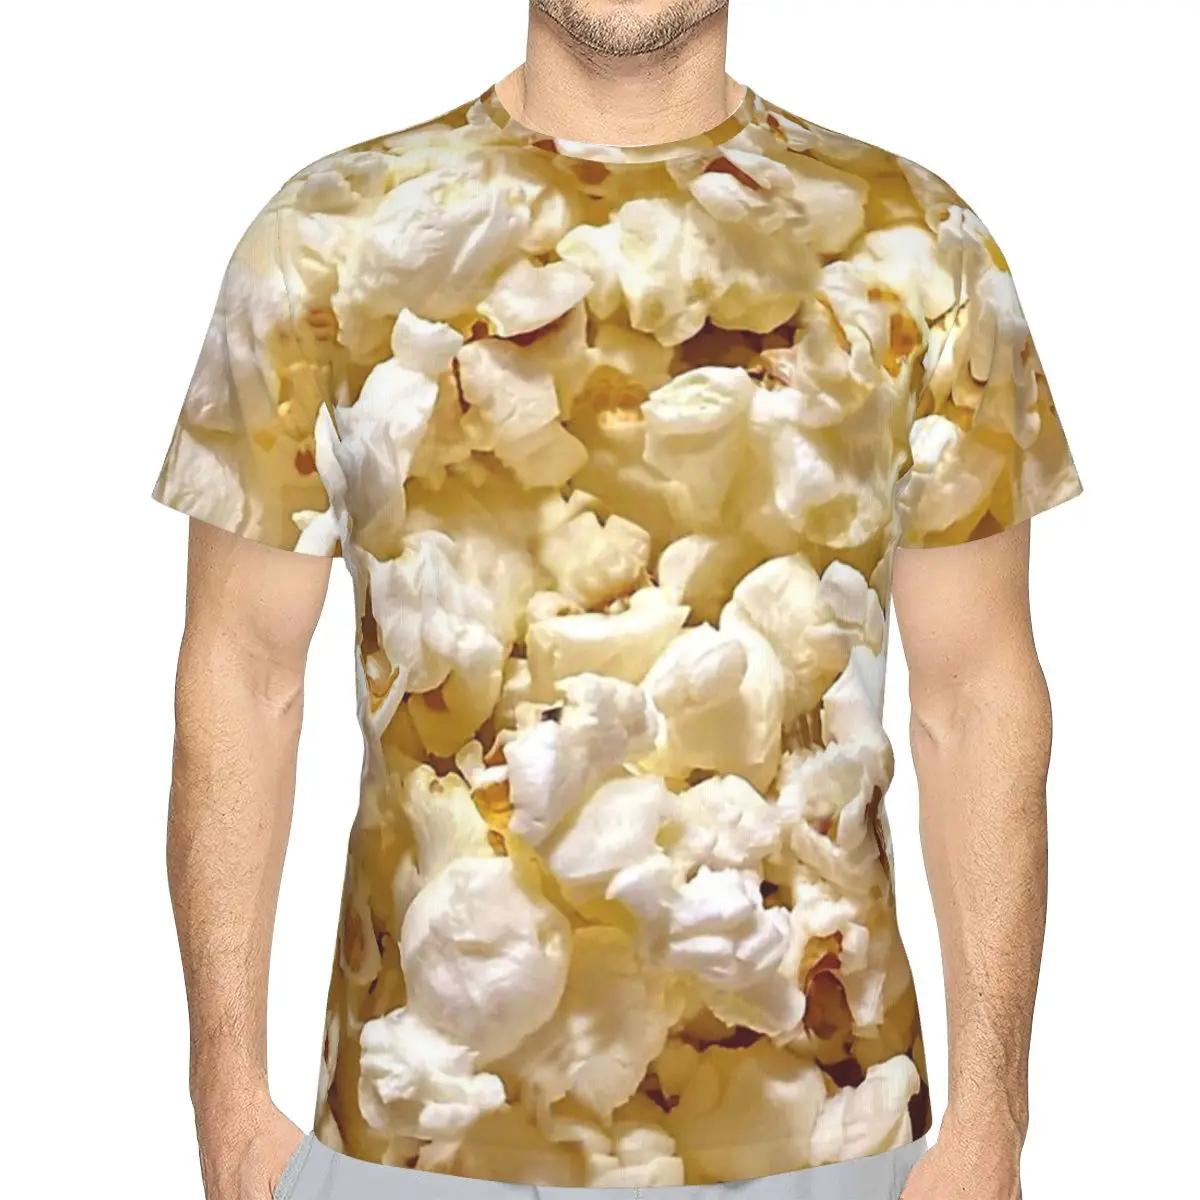 

Food Lover Art Polyester 3D TShirts Popcorn Personalize Men's Thin T Shirt New Trend Tops